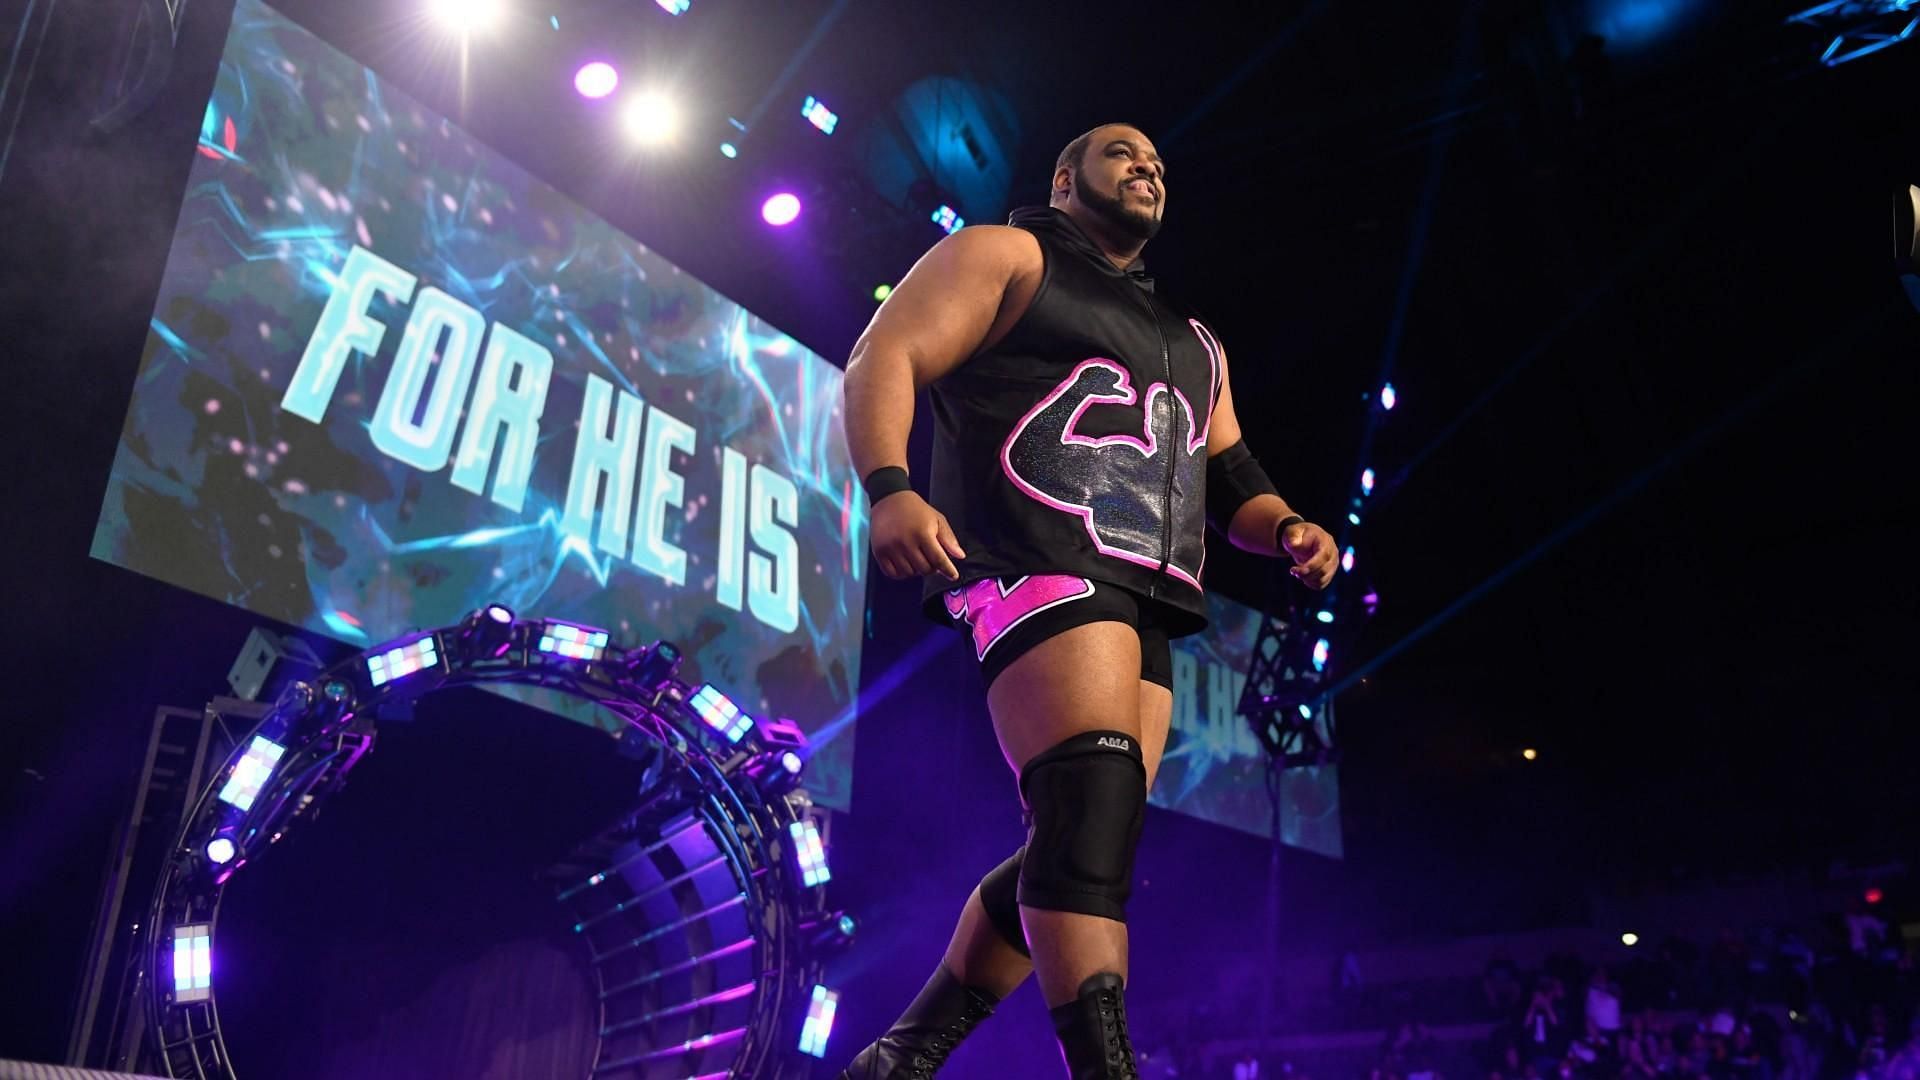 The former NXT Champion signed with AEW a few weeks ago